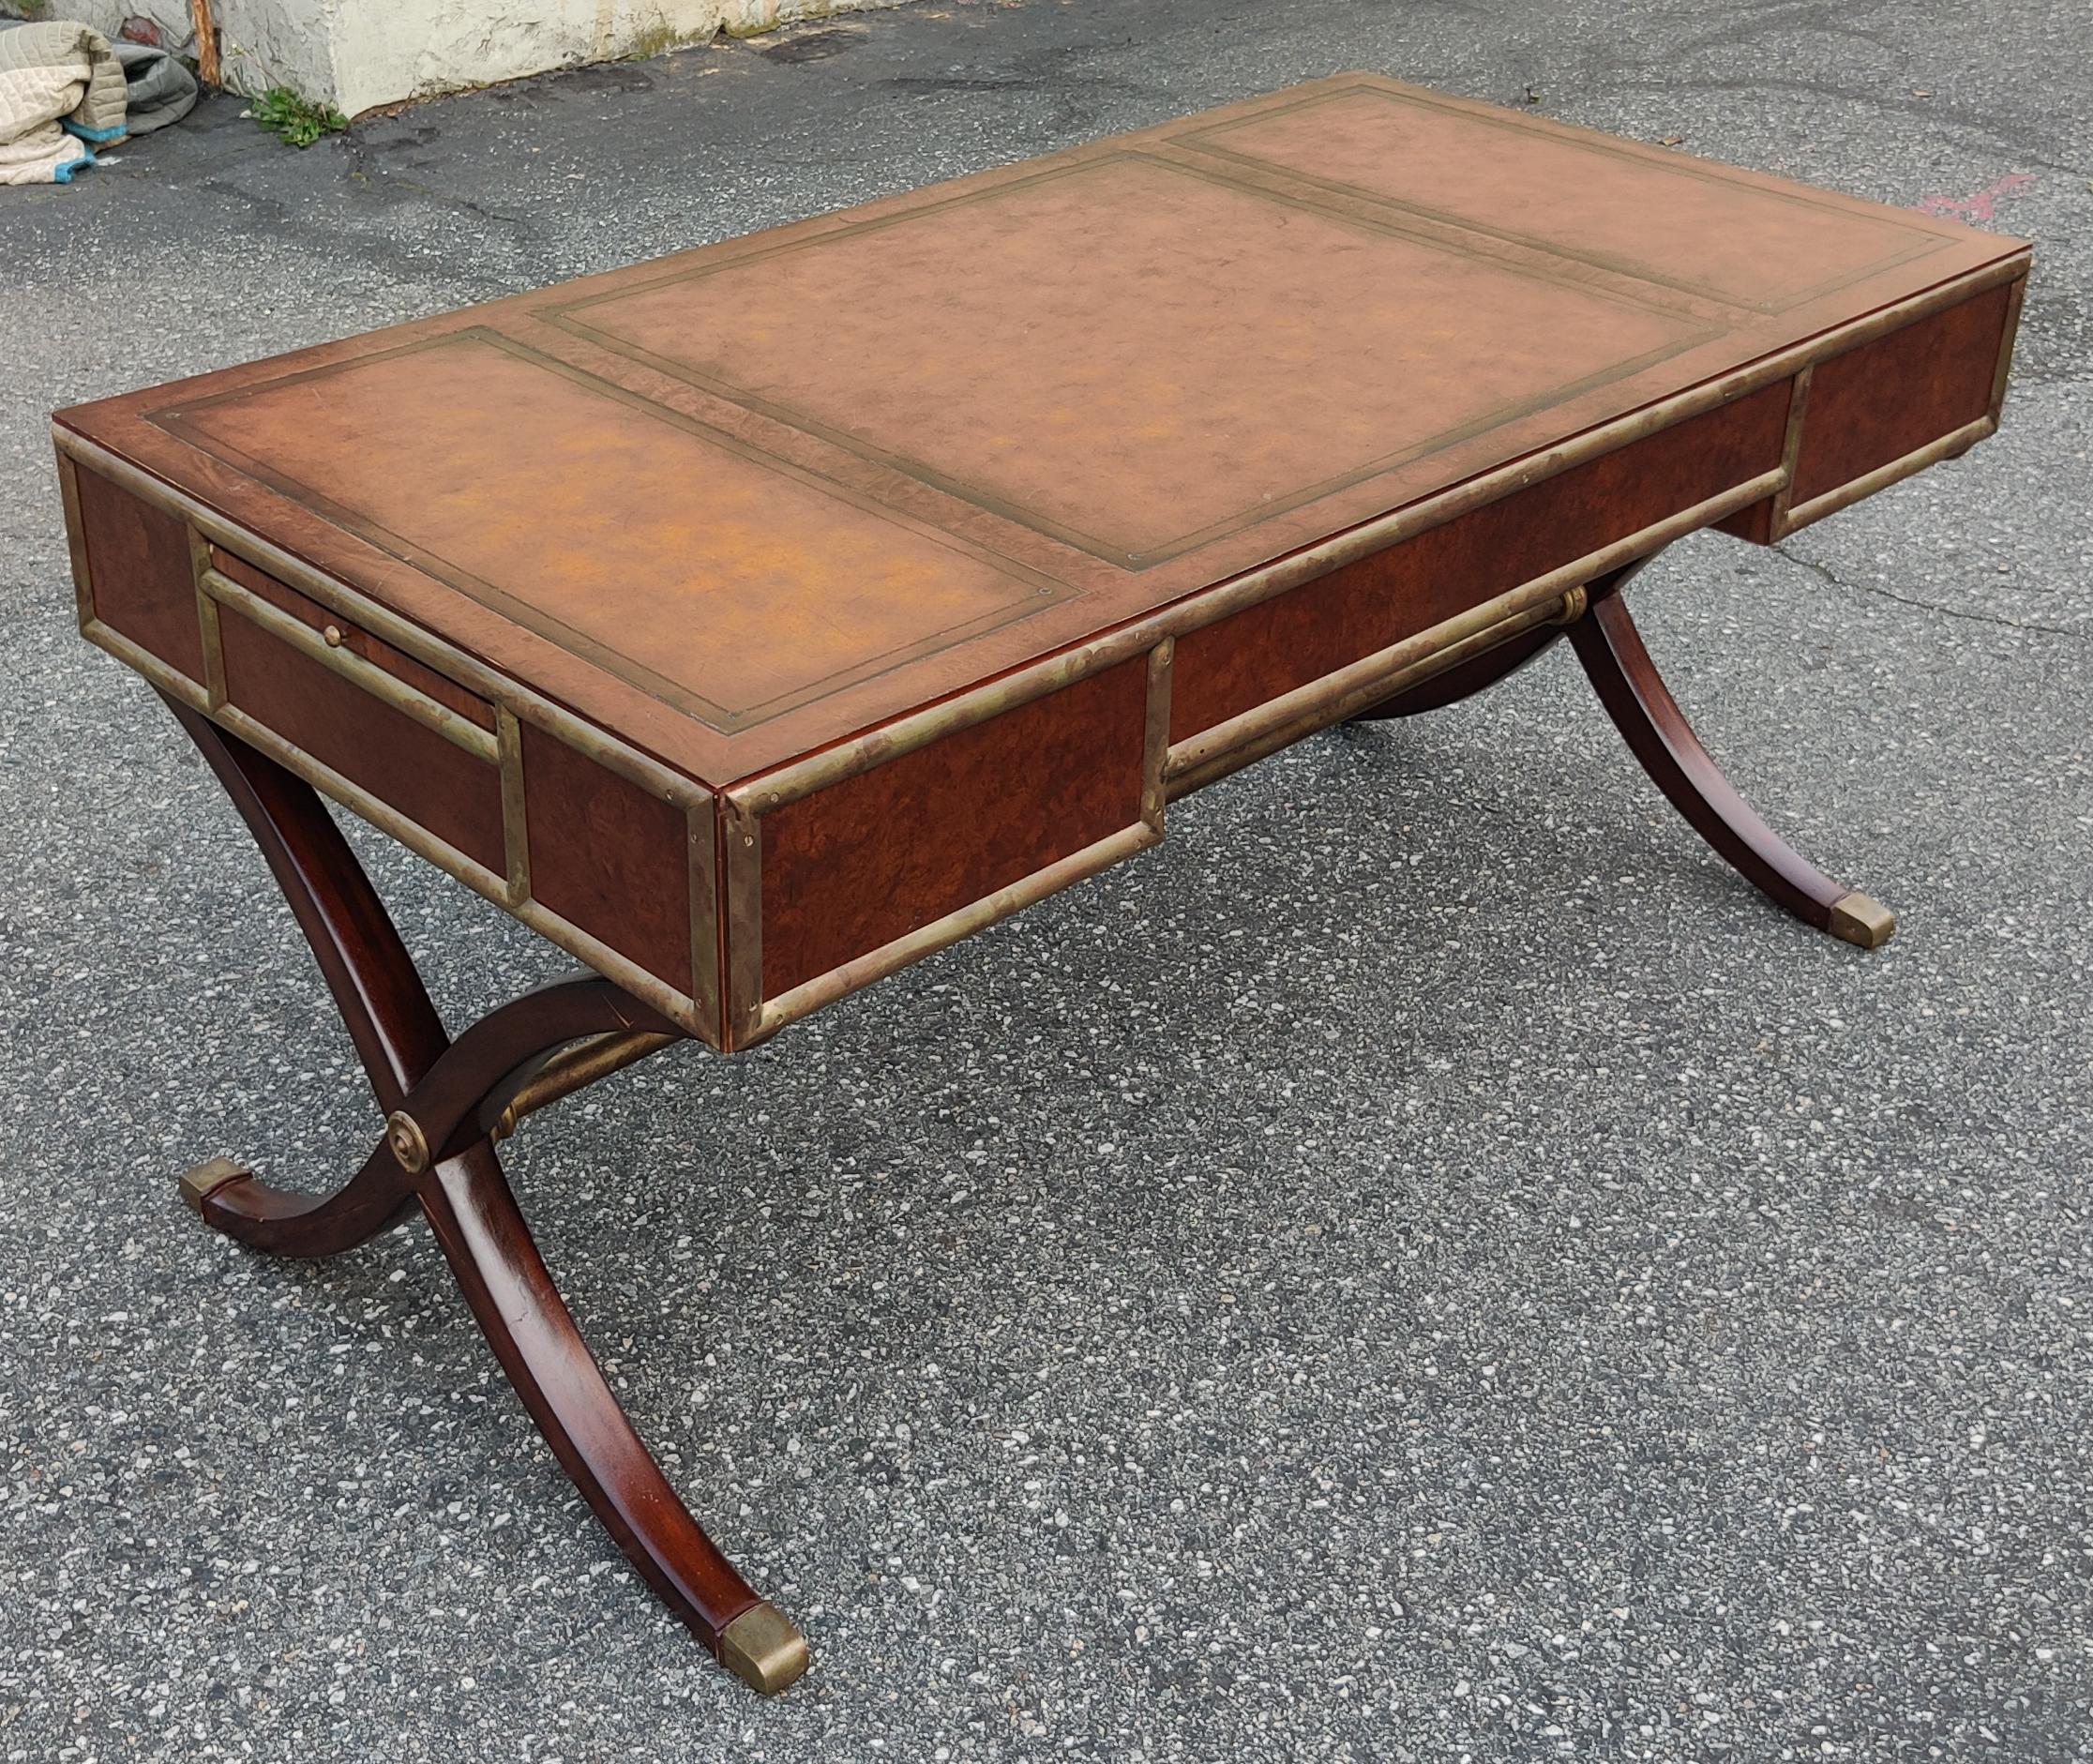 Gilt Ernest Hemingway Thomasville Campaign Style Leather Brass Mahogany Desk & Chair